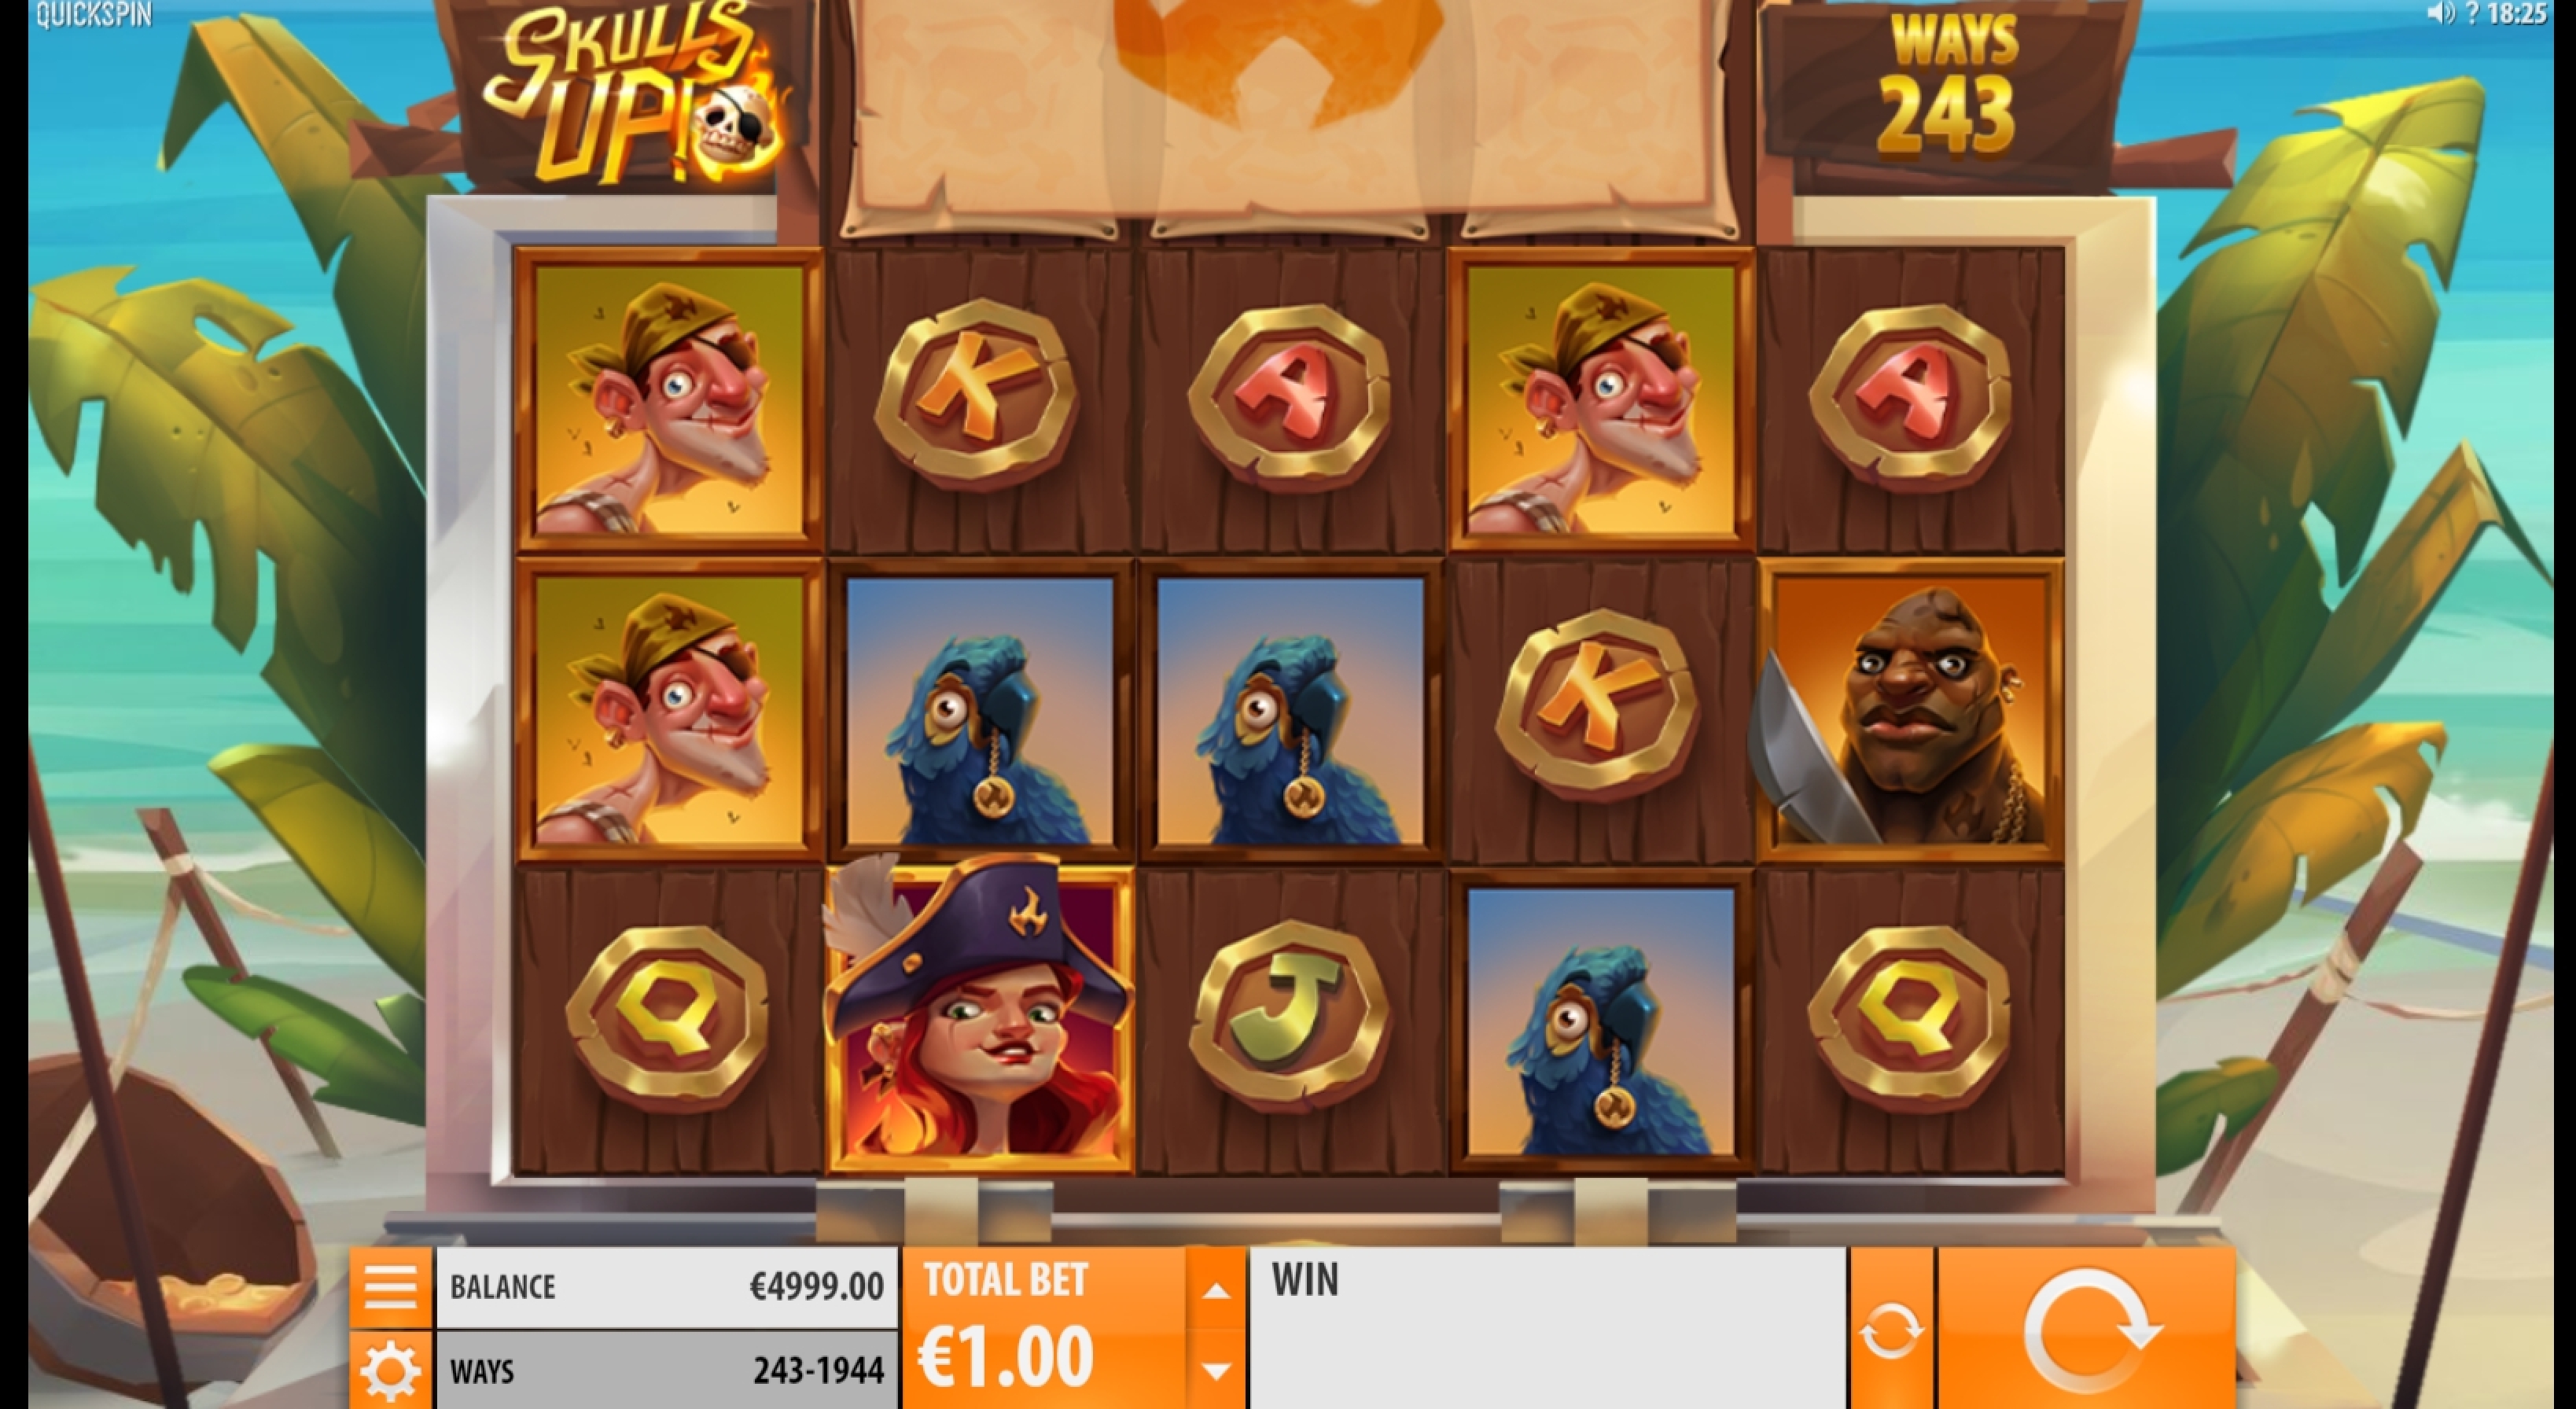 Reels in Skulls UP! Slot Game by Quickspin